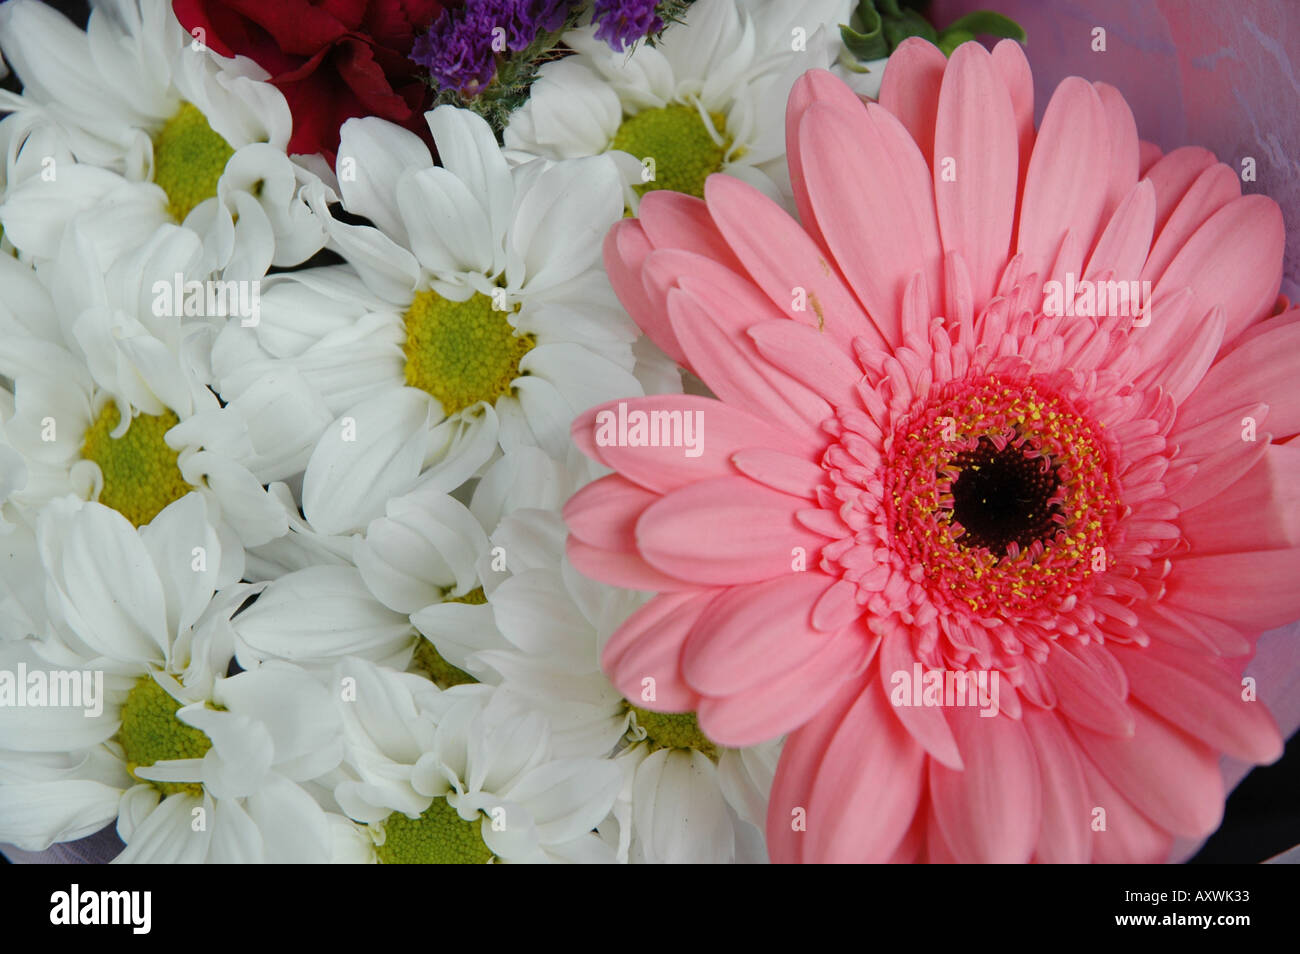 one pink Transvaal Daisy among white daisies Stock Photo